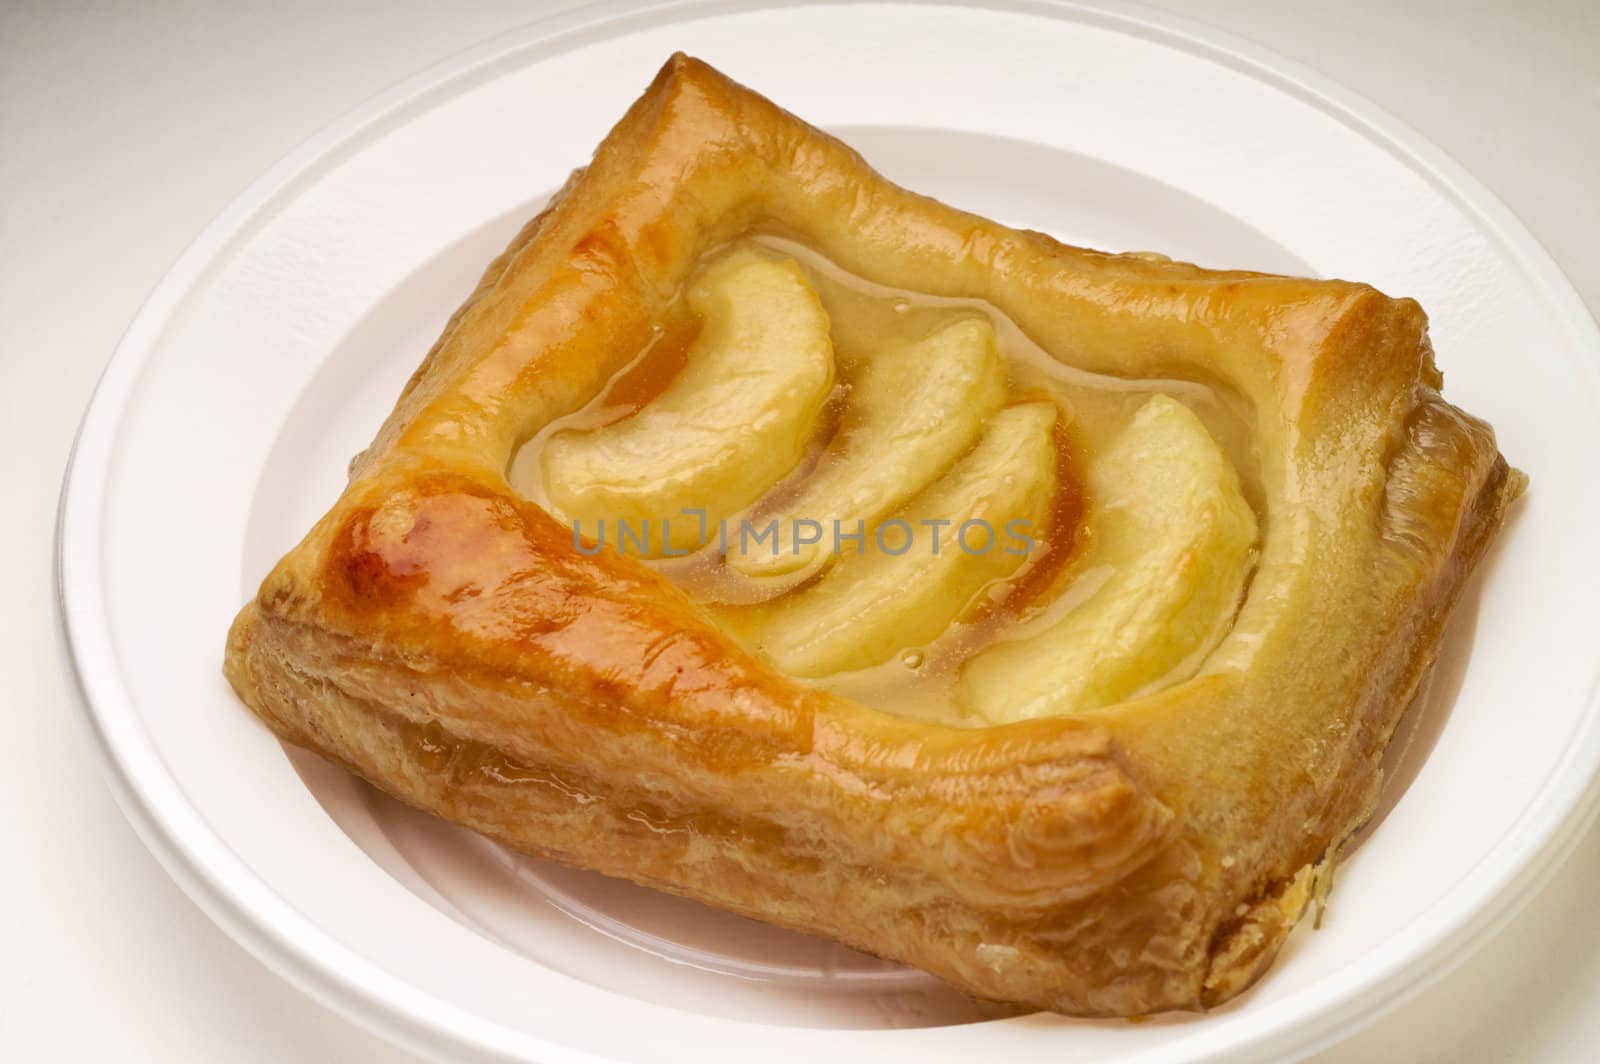 Apple puff pastry dessert with clipping path